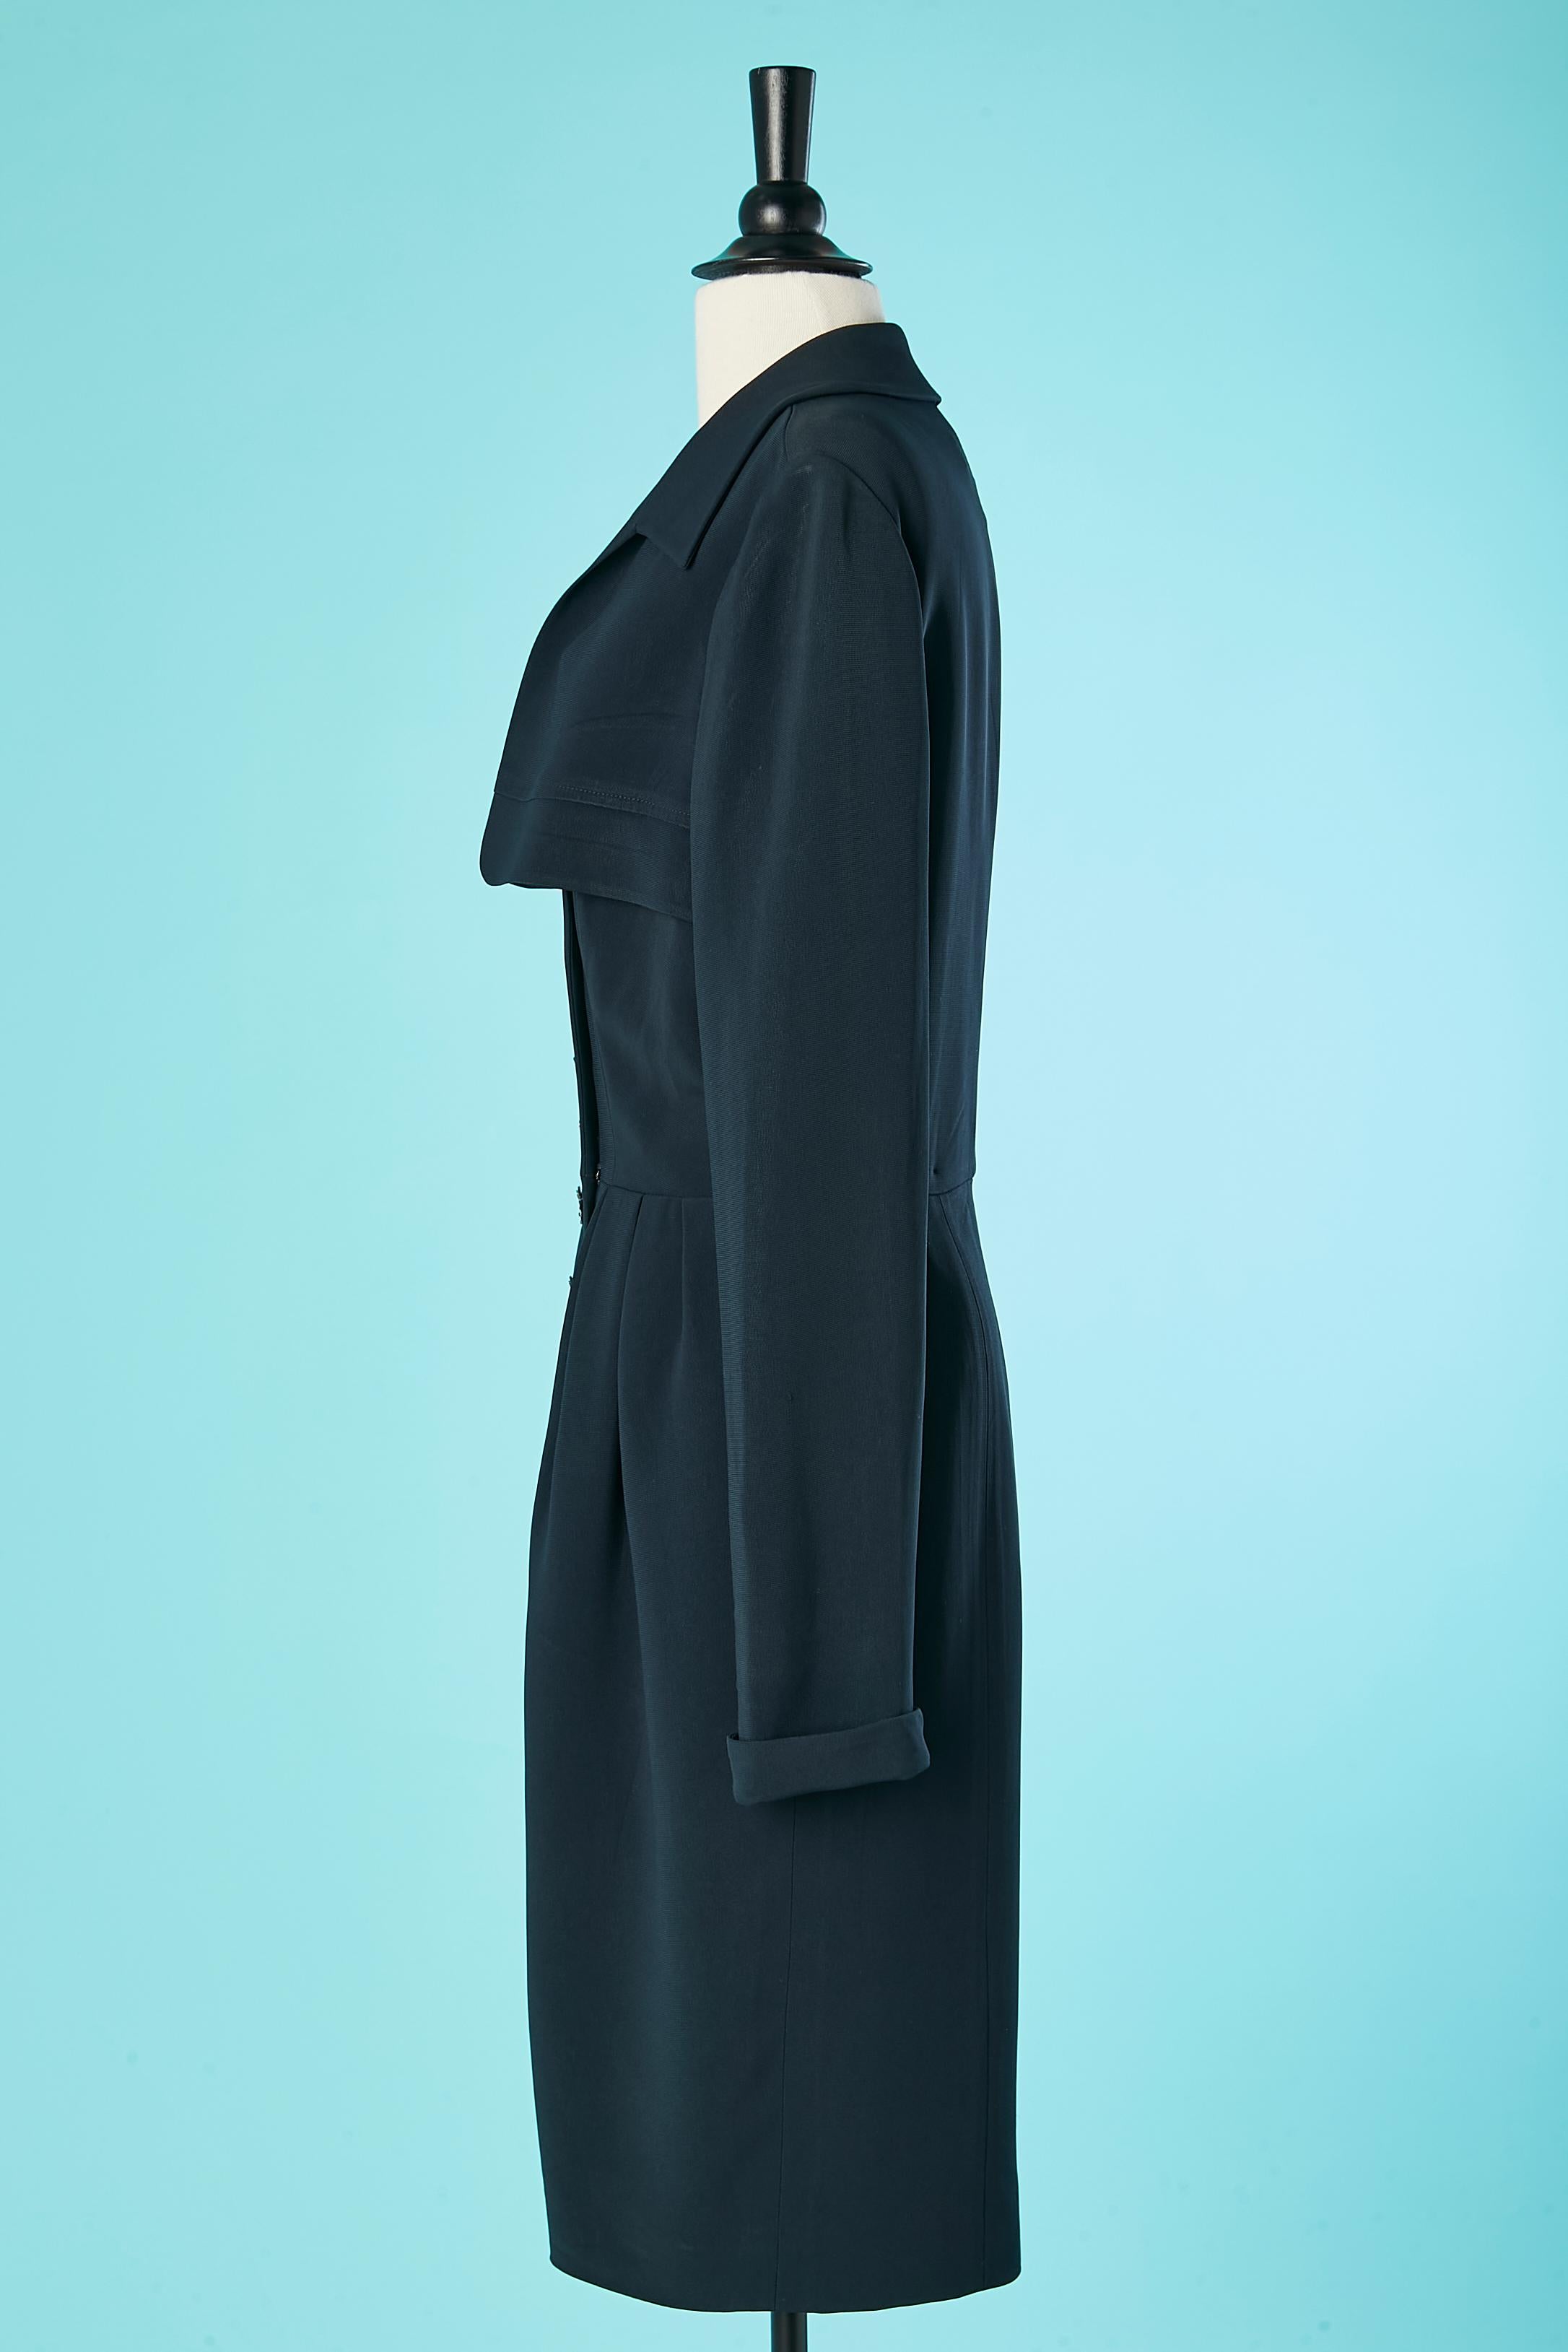 Women's Navy blue double-breasted coat-dress Karl Lagerfeld for Chloé  For Sale